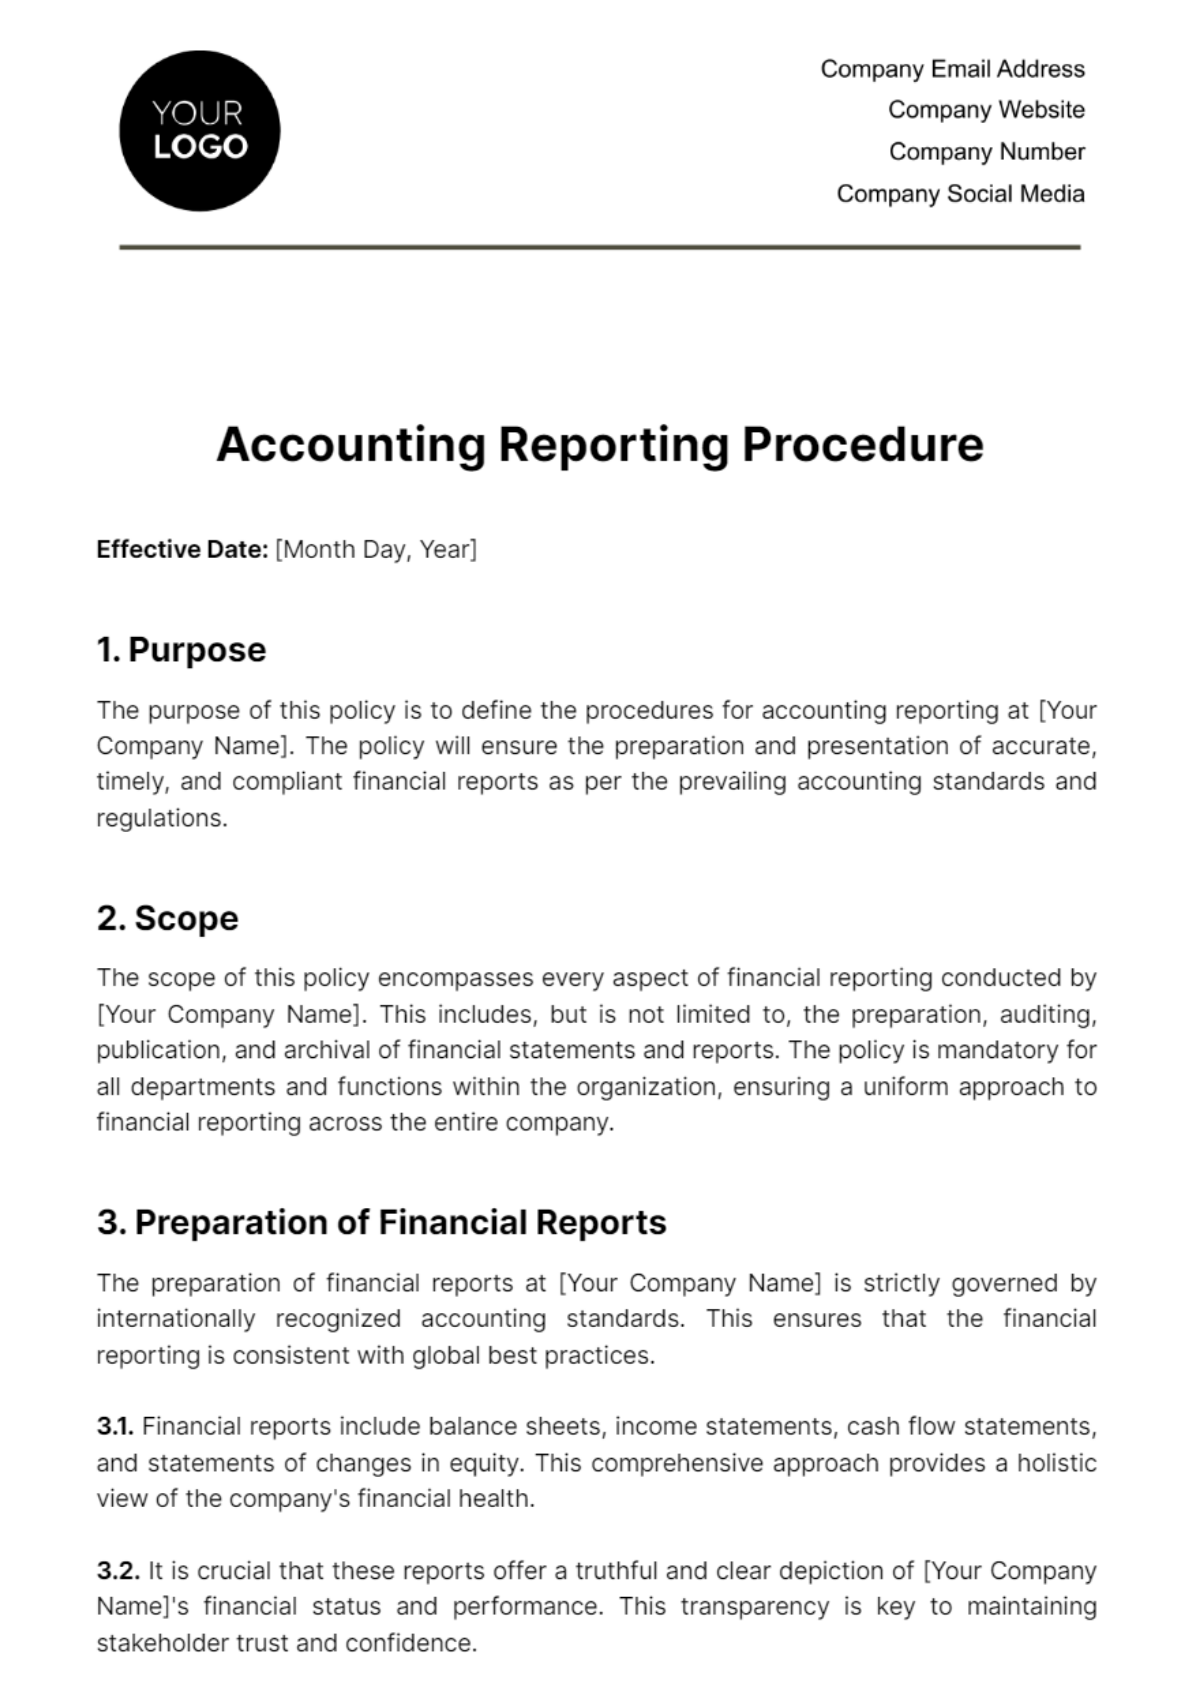 Accounting Reporting Procedure Template